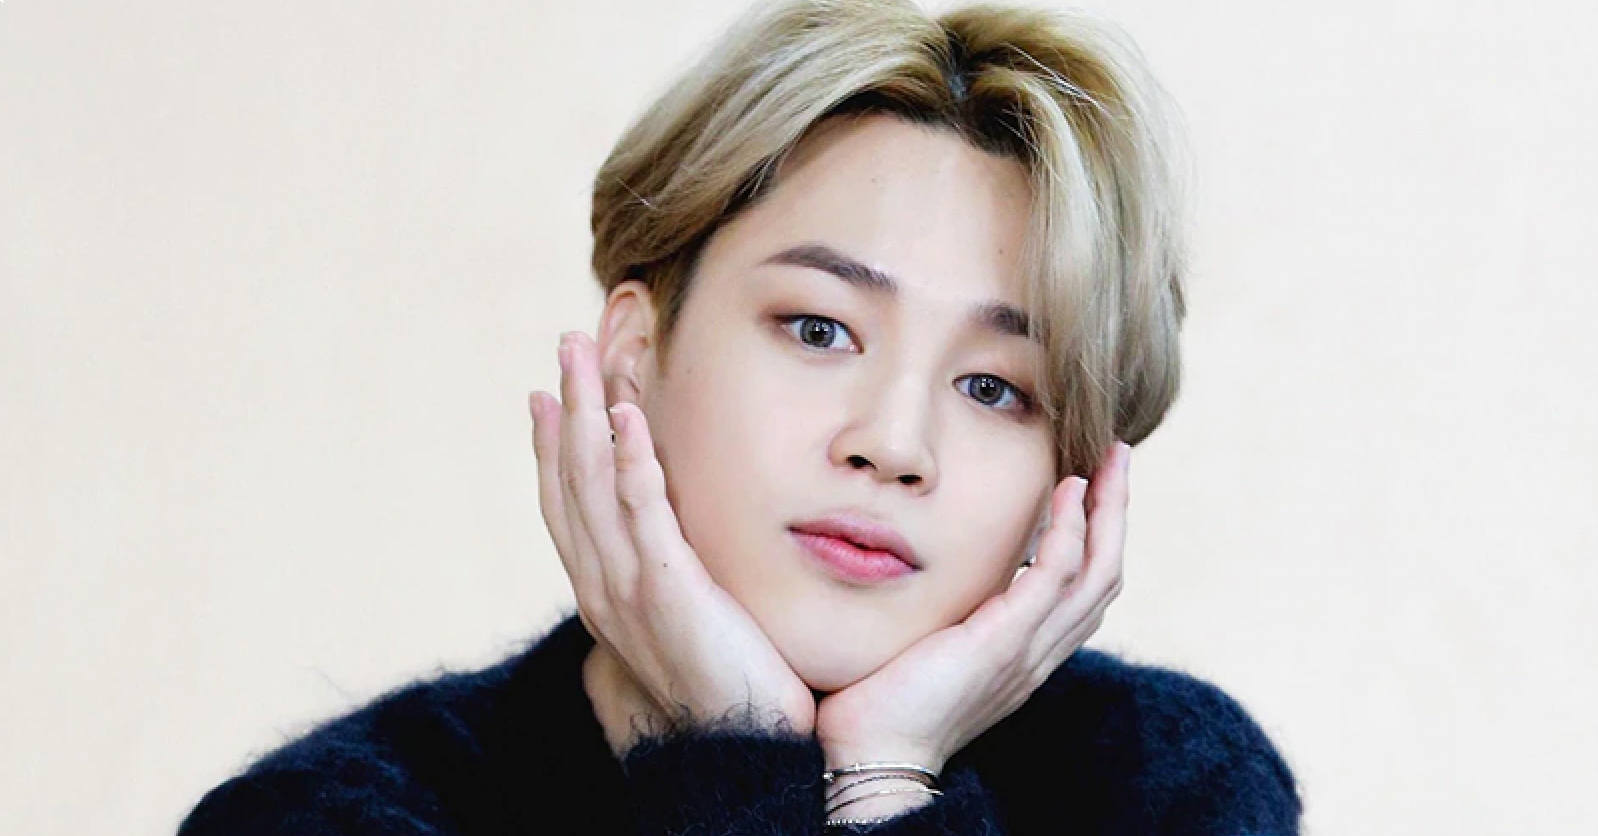 BTS Jimin Enters Top 50 as Only Asian Solo Artist Mentioned the Most in Italy